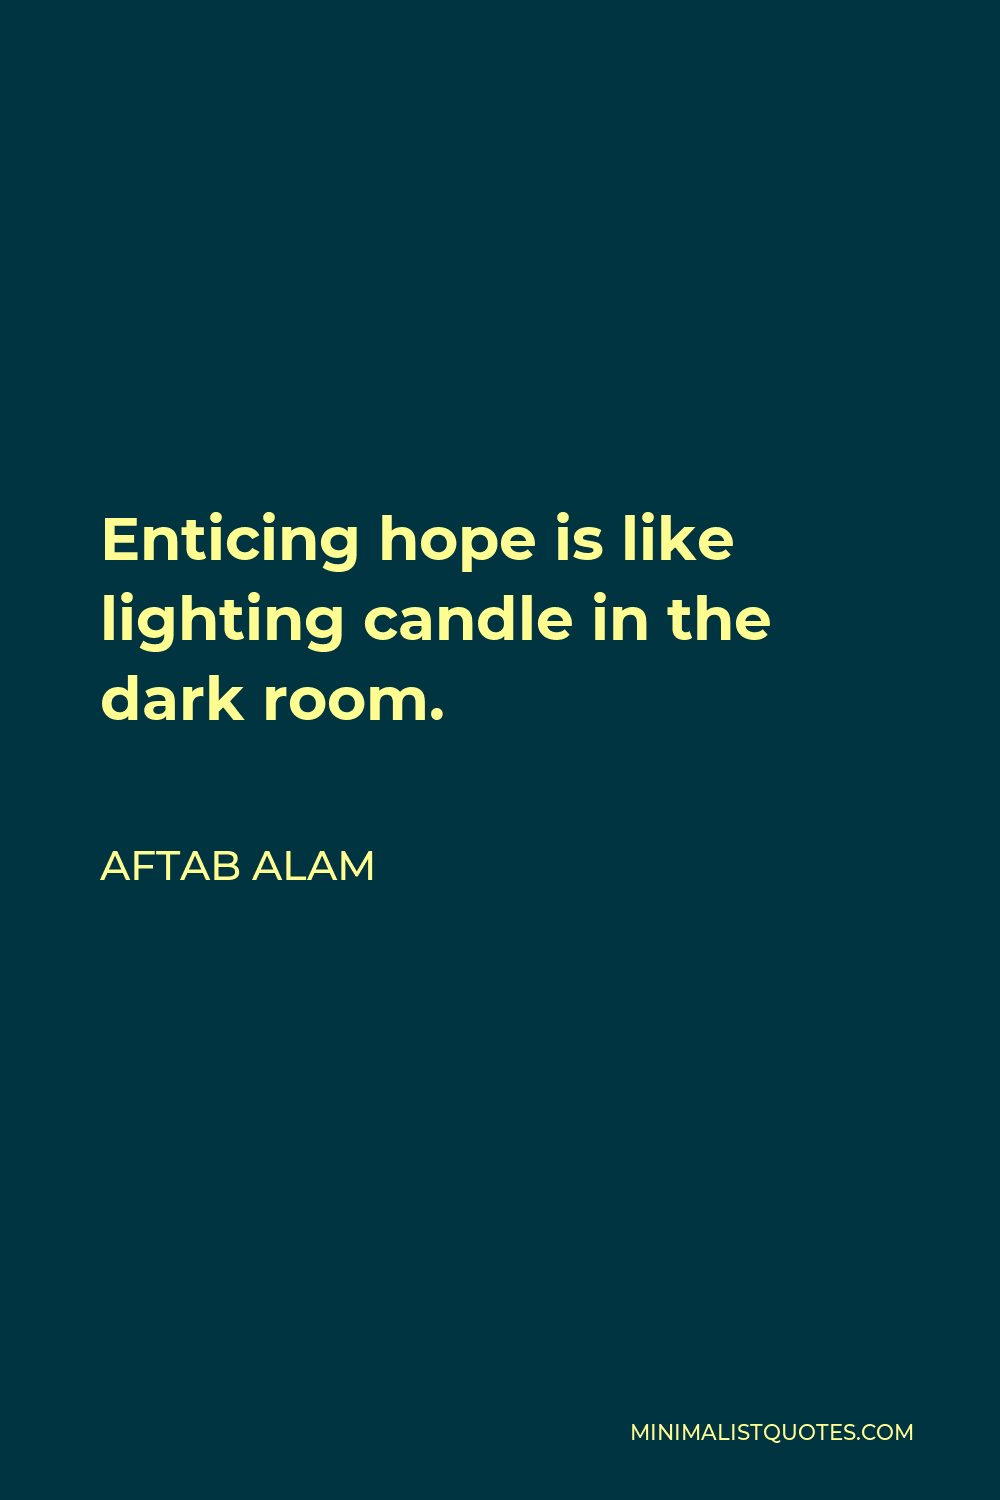 Aftab Alam Quote - Enticing hope is like lighting candle in the dark room.